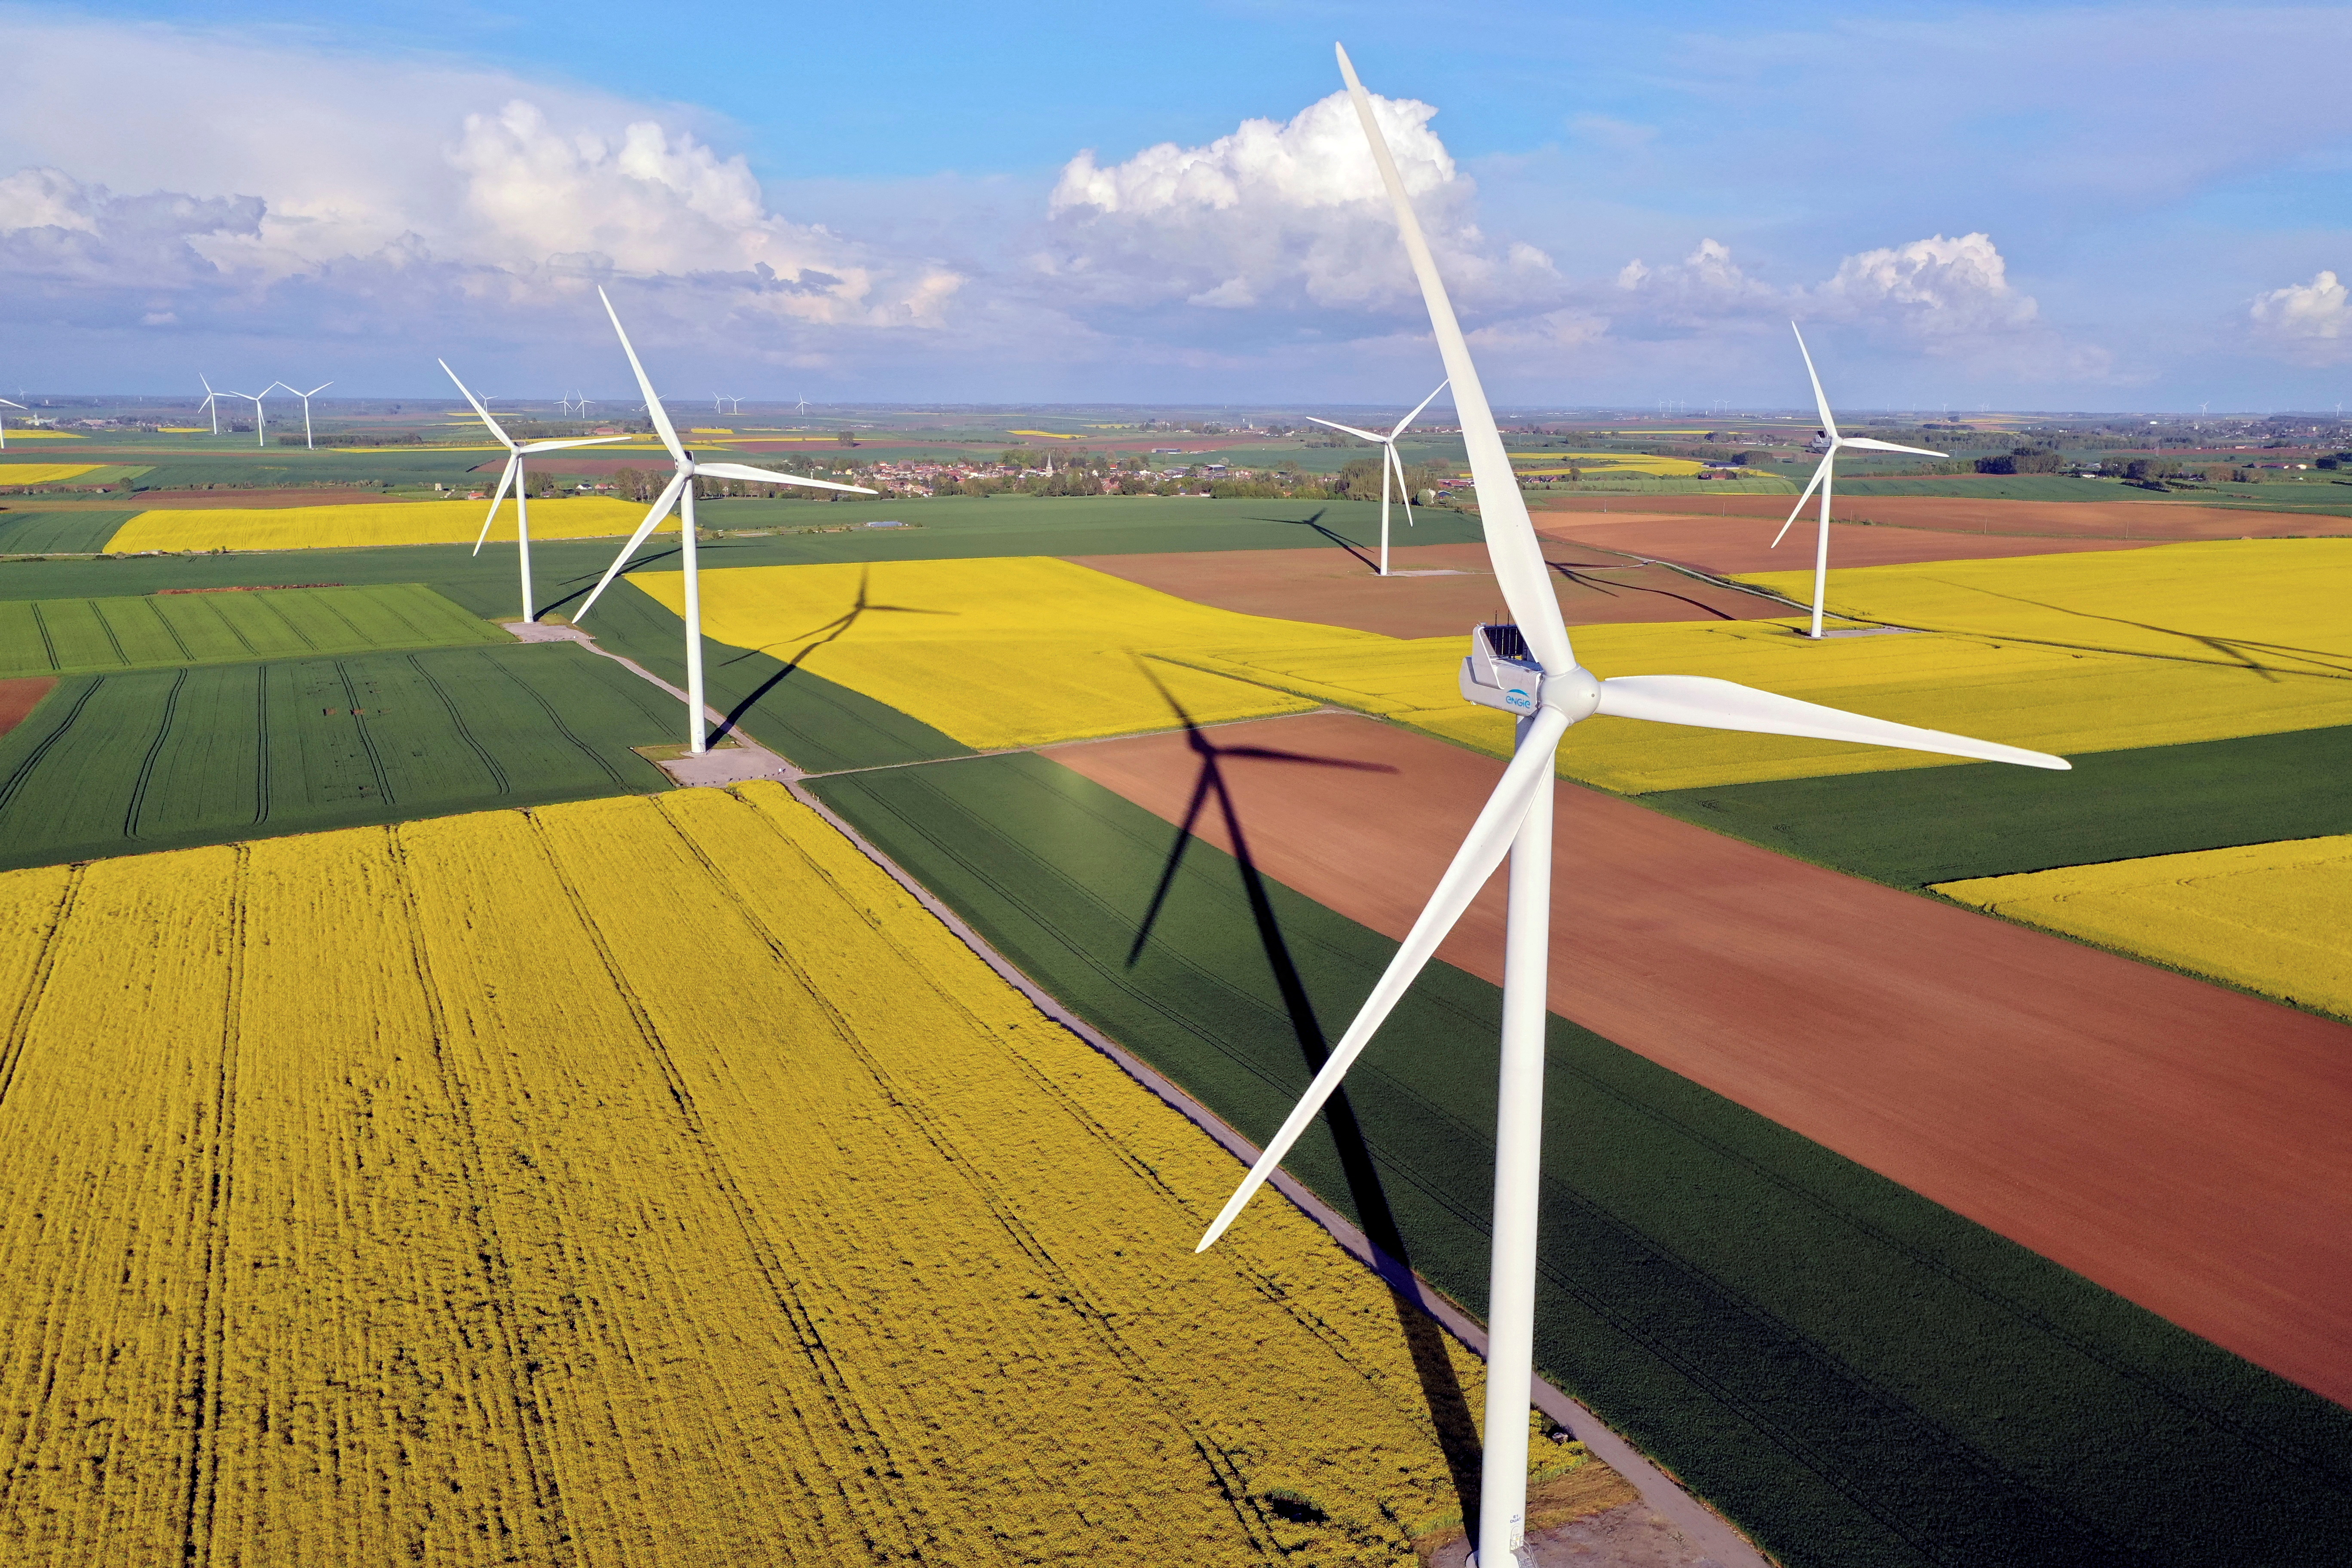 An aerial view shows Engie Green power-generating windmill turbines in the middle of rapeseed and wheat fields, in Saint-Hilaire-lez-Cambrai